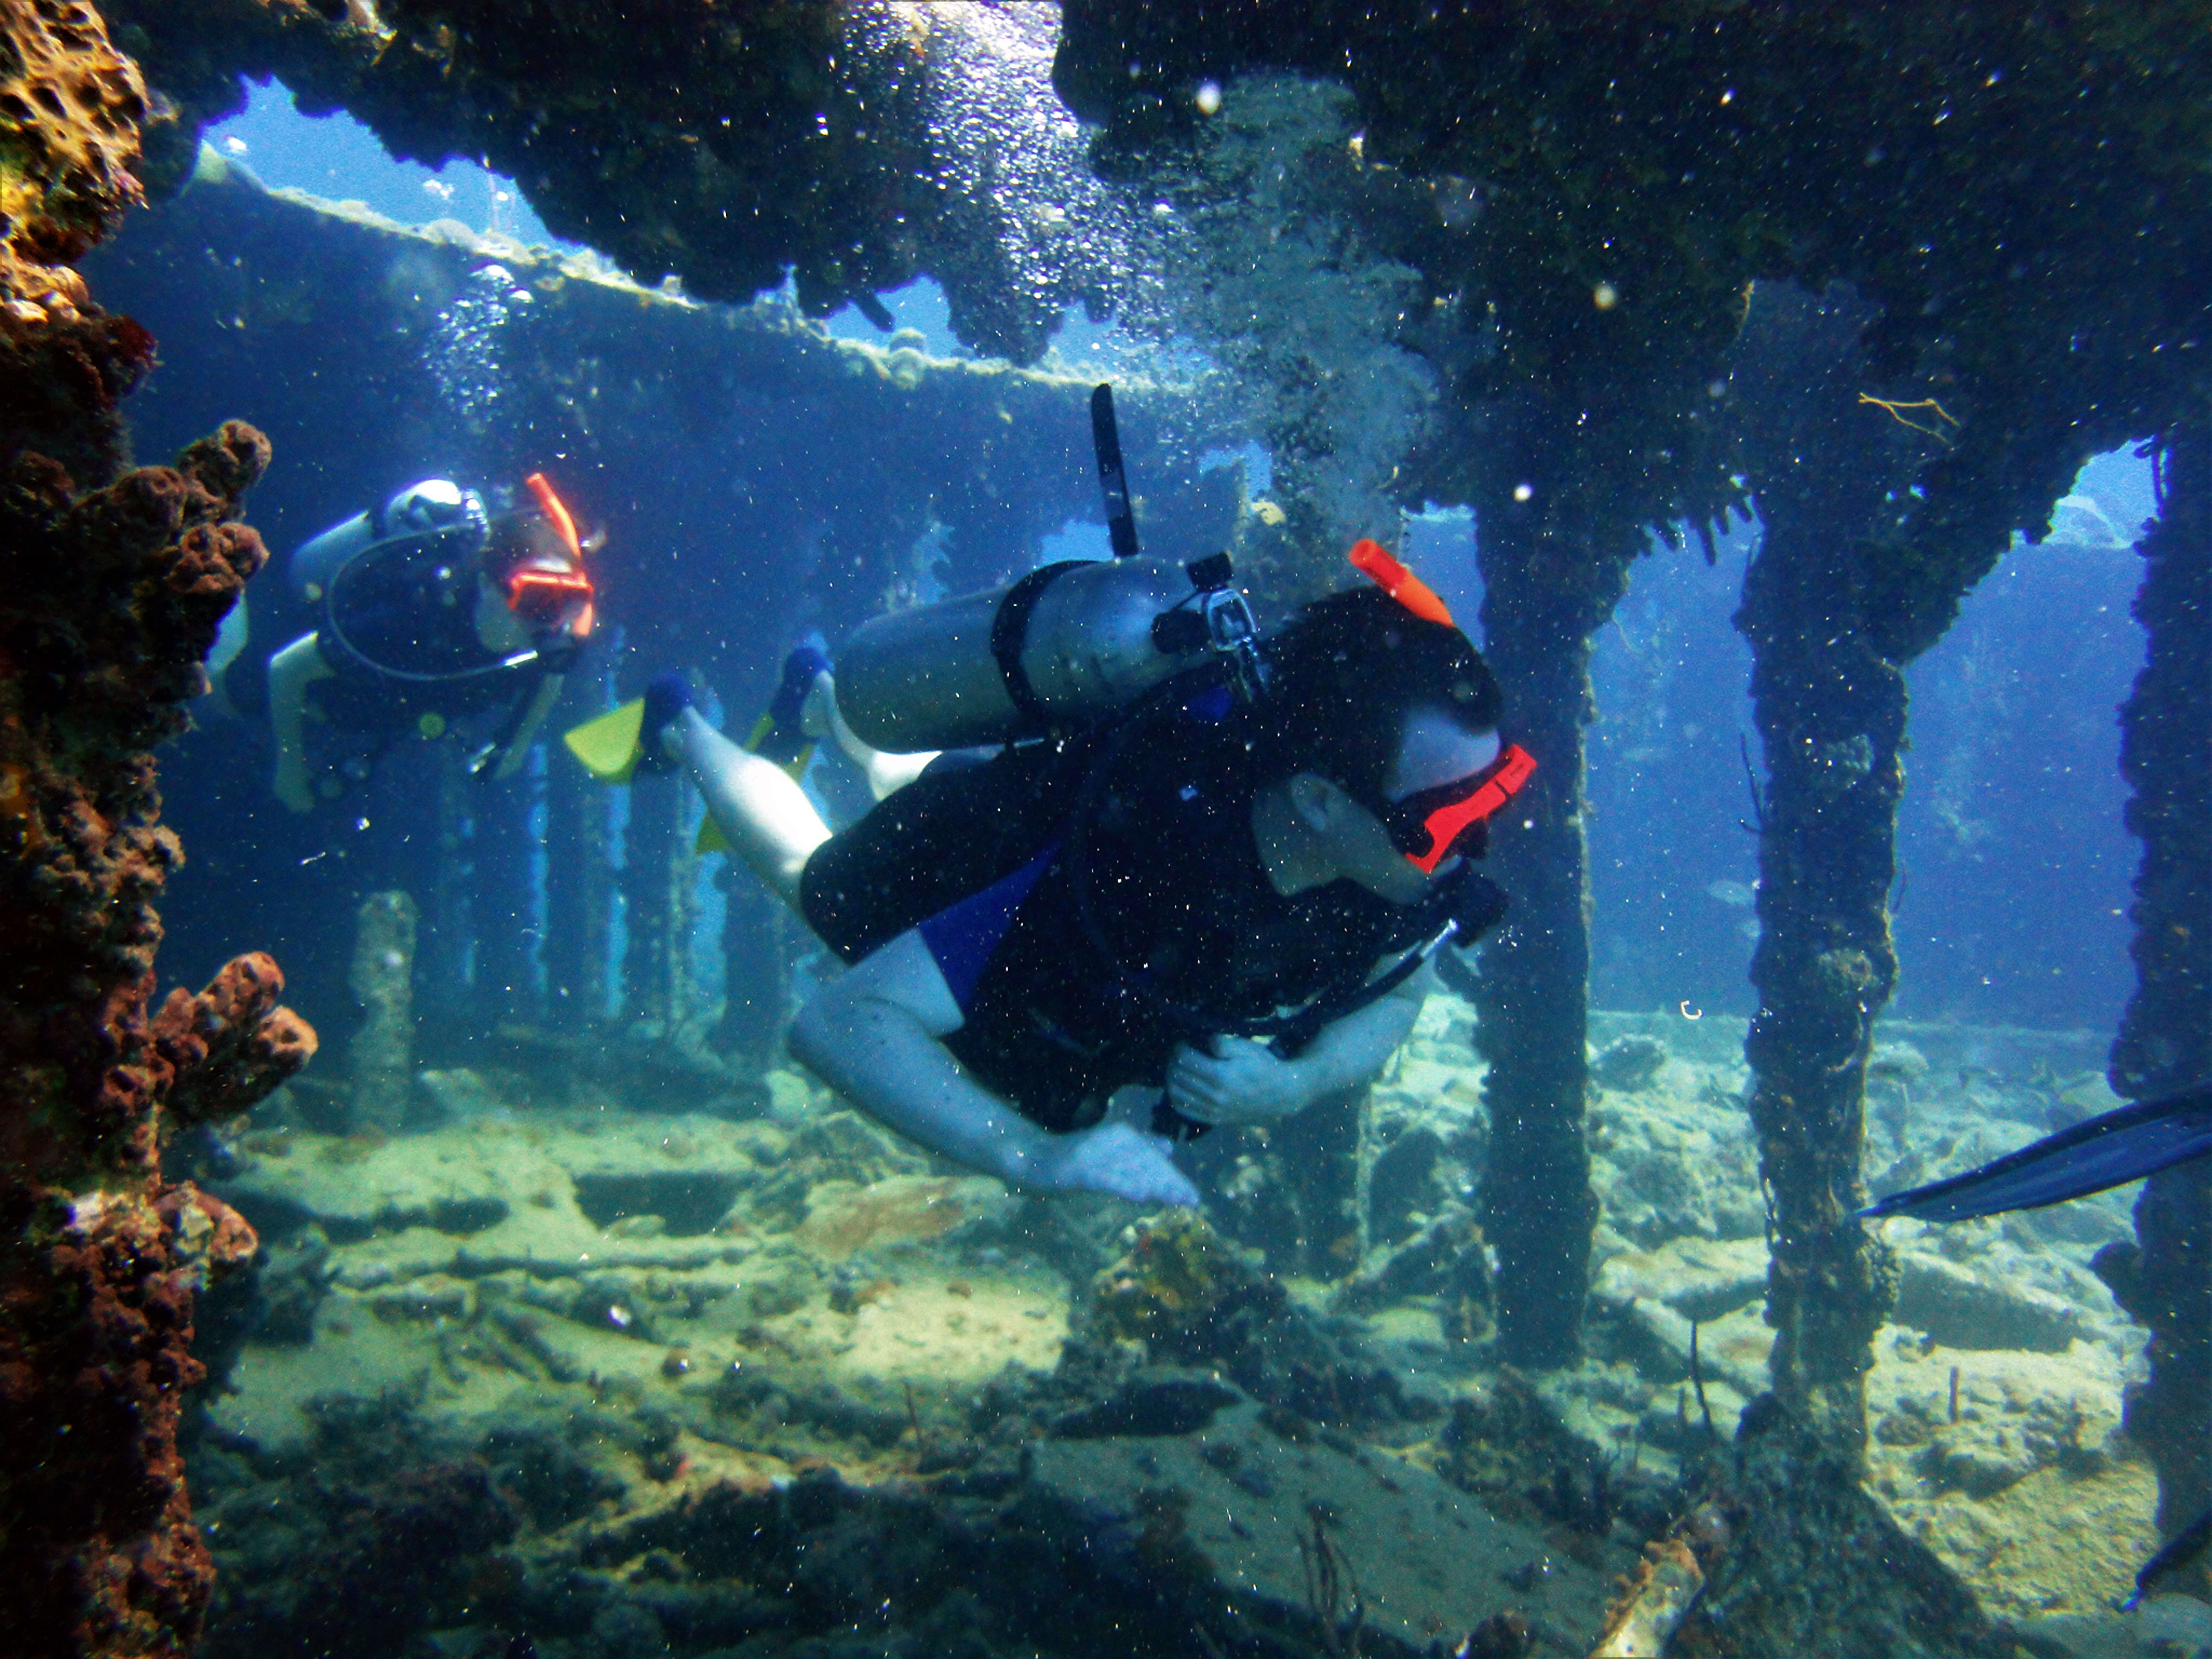 two wreck divers discover hidden treasures in the mysterious expanse of water